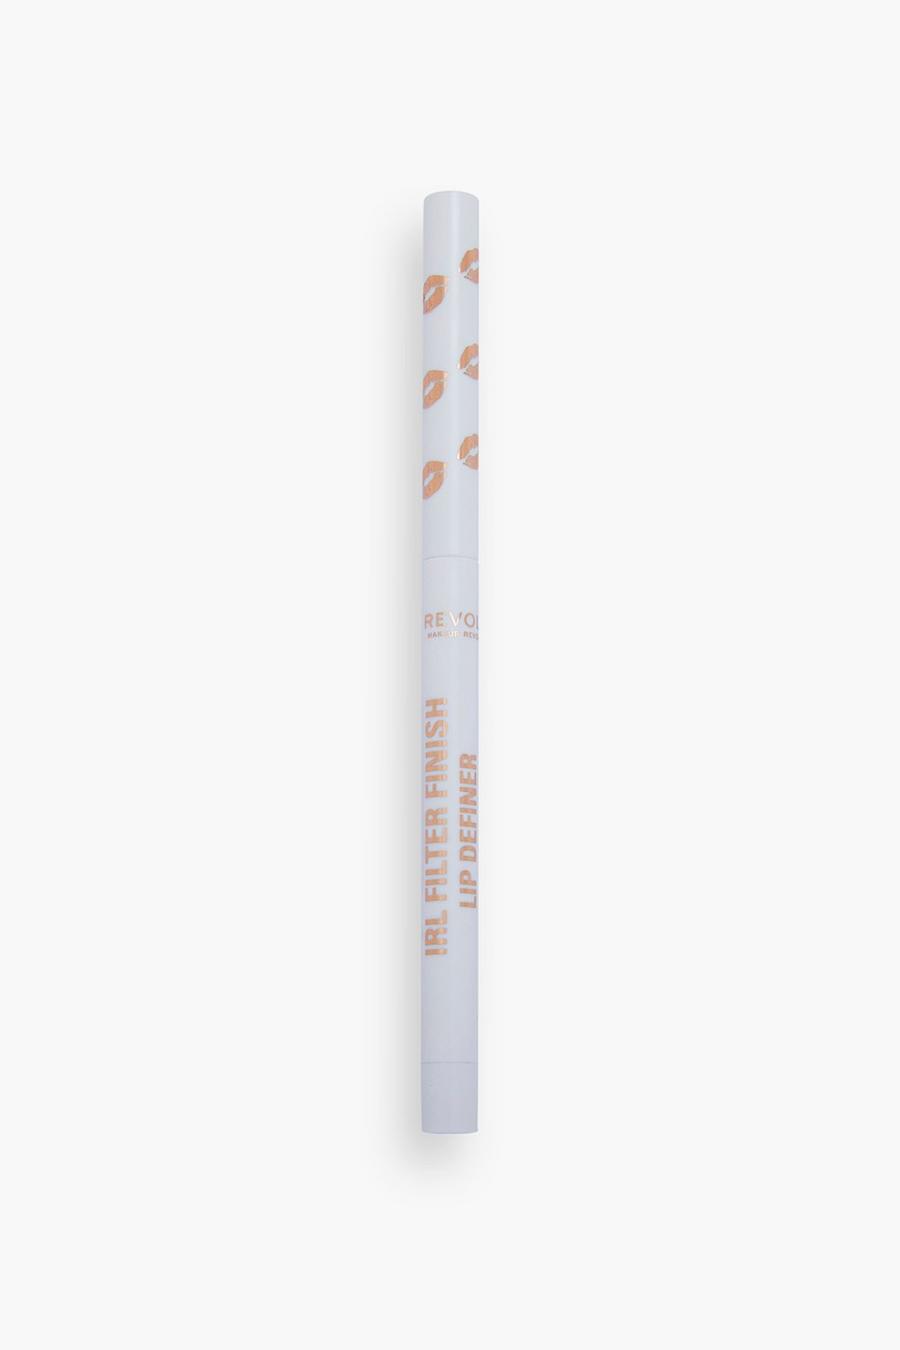 Revolution IRL - Definitore labbra Filter Finish Lip Liner, Clear cup image number 1